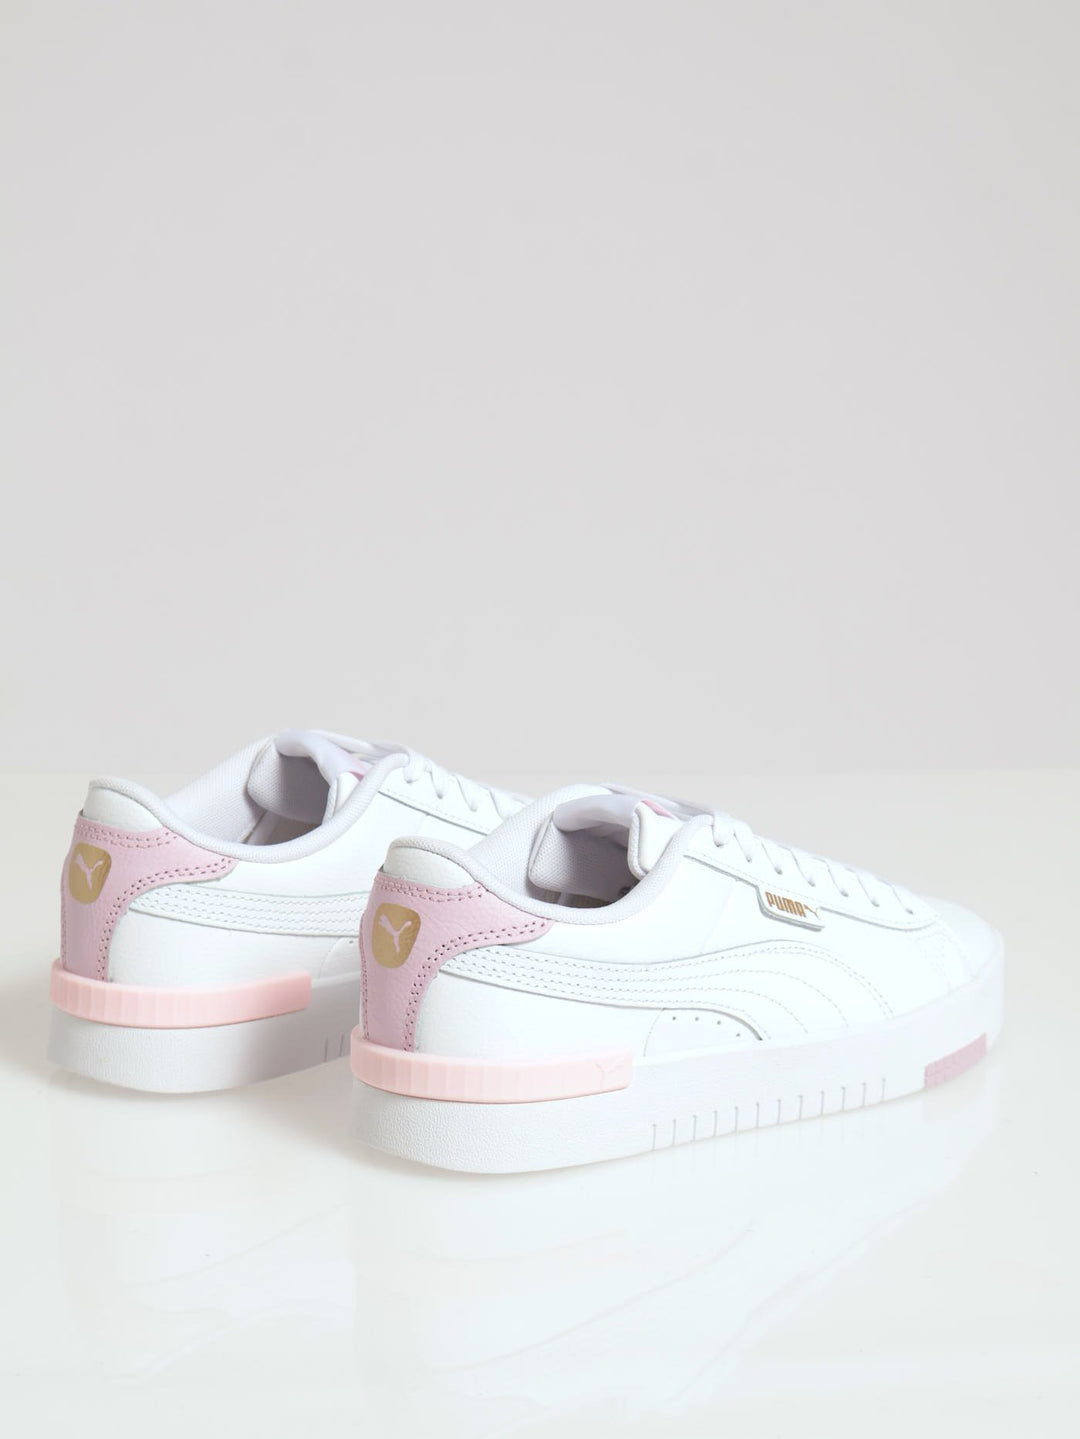 Jada Renew Lace Up Low Sneaker - White/Pink